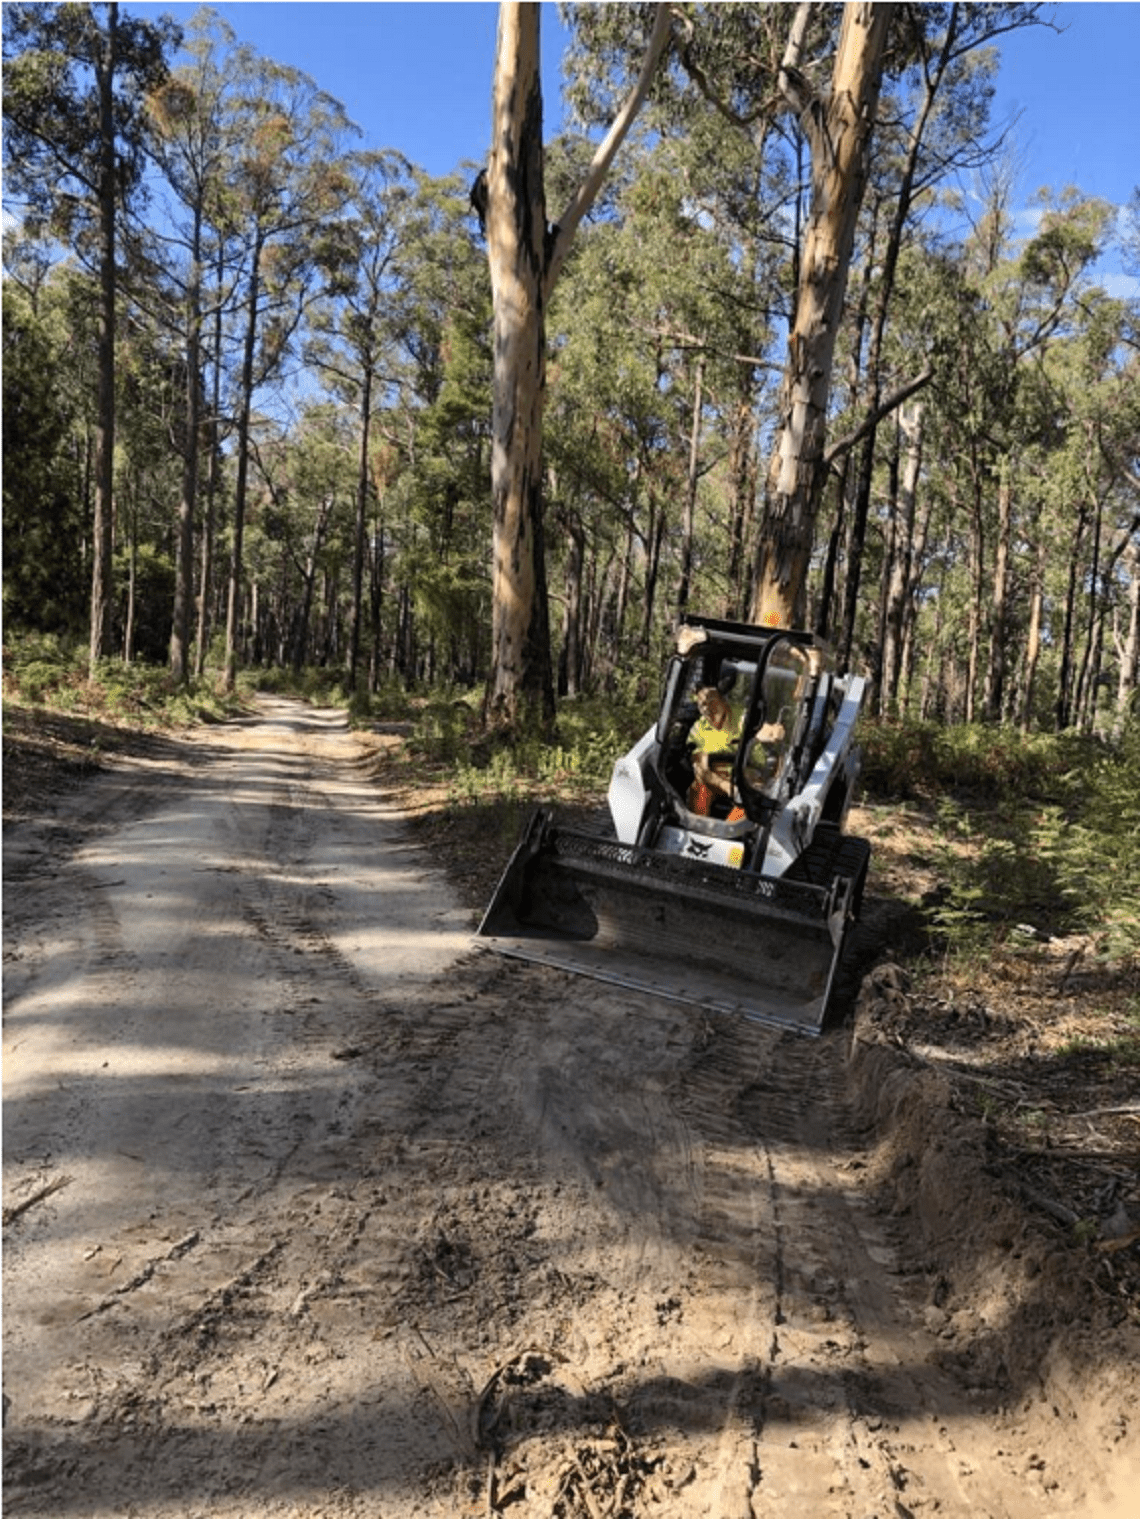 Image shows road repairs by a Parks Victoria staff member in a digger